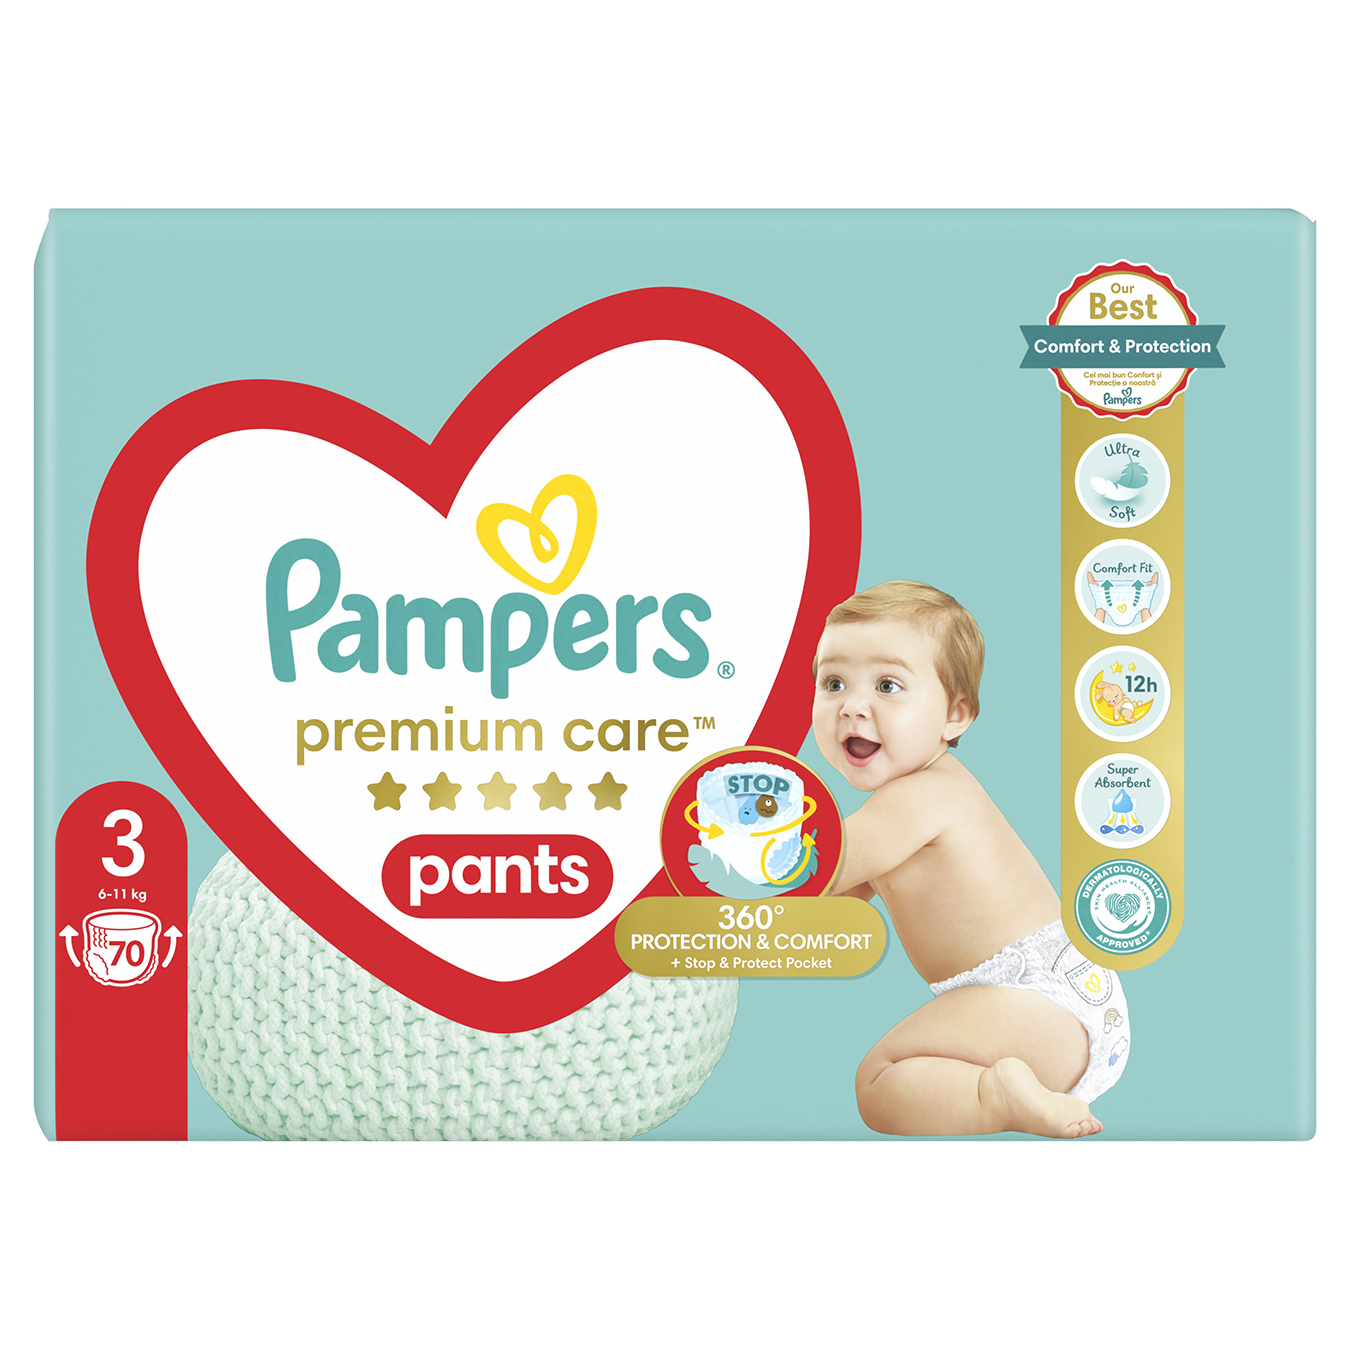 Pampers a Buy good kg ᐈ price for children 6-11 diapers-panties 70 Care at Pants Midi pcs Novus from Premium